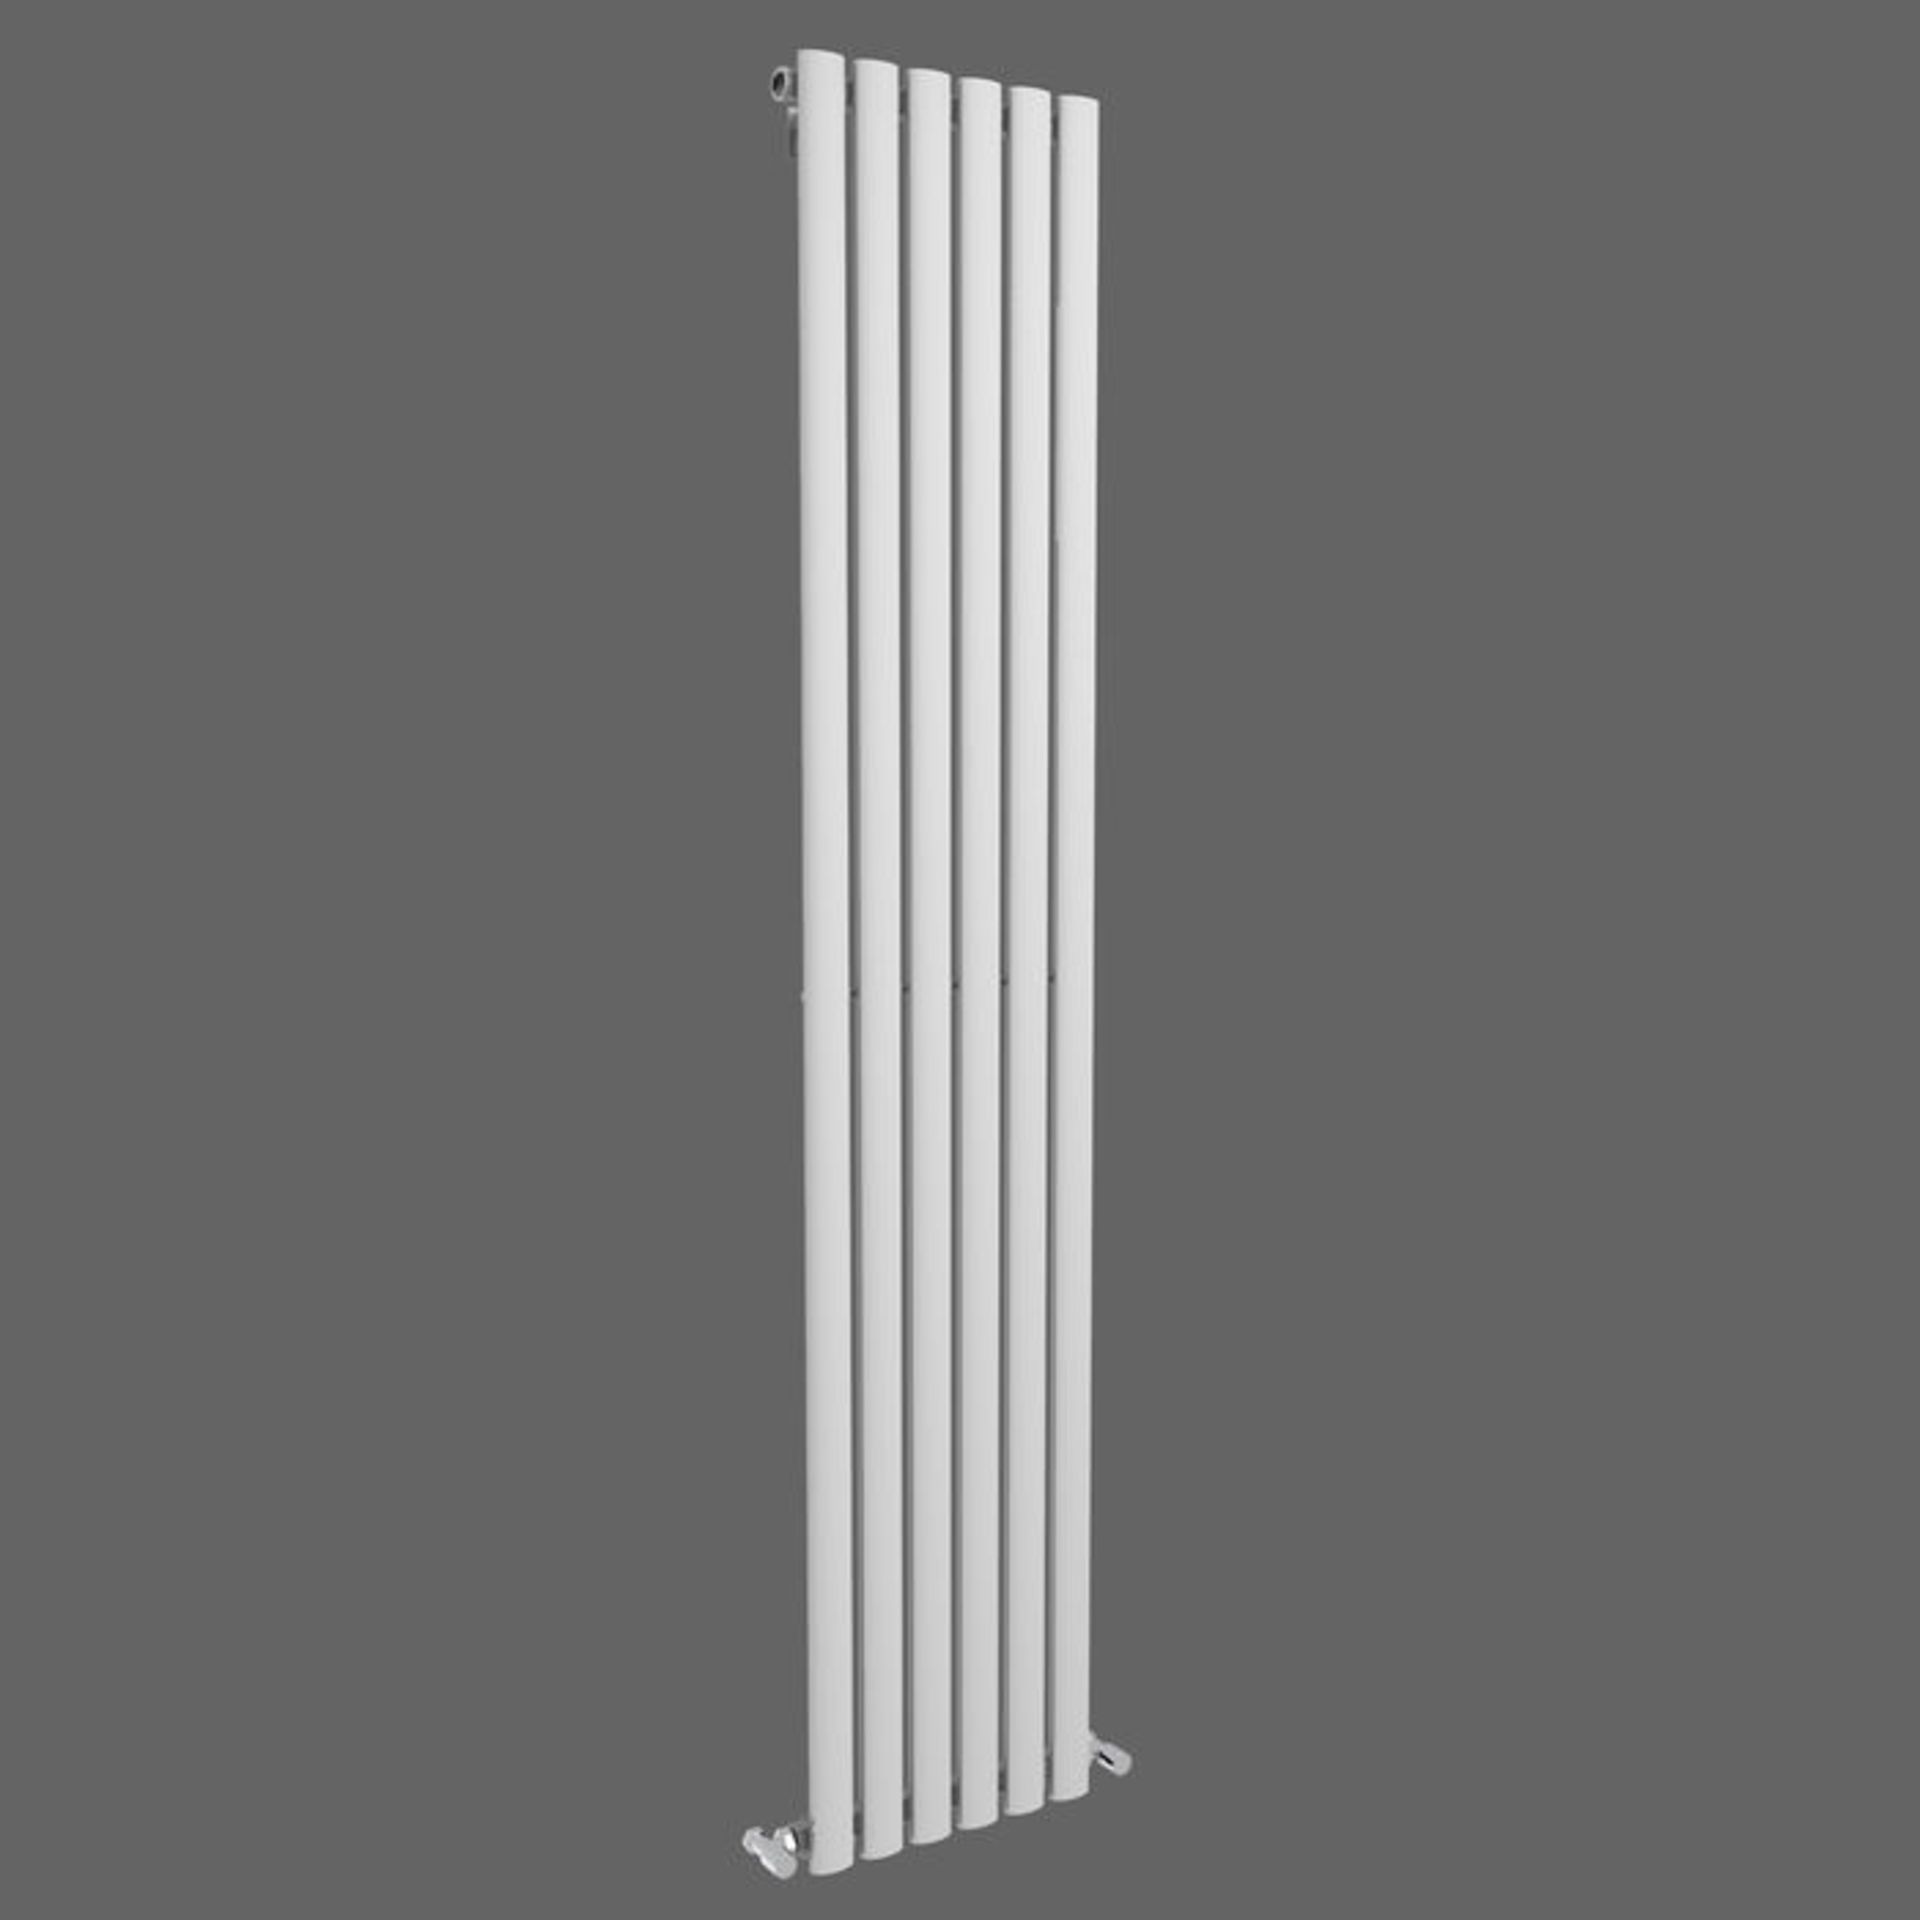 New & Boxed 1800X360mm Gloss White Single Oval Tube Vertical Radiator. Rrp £256.99. Sah6/1800S... - Image 3 of 3